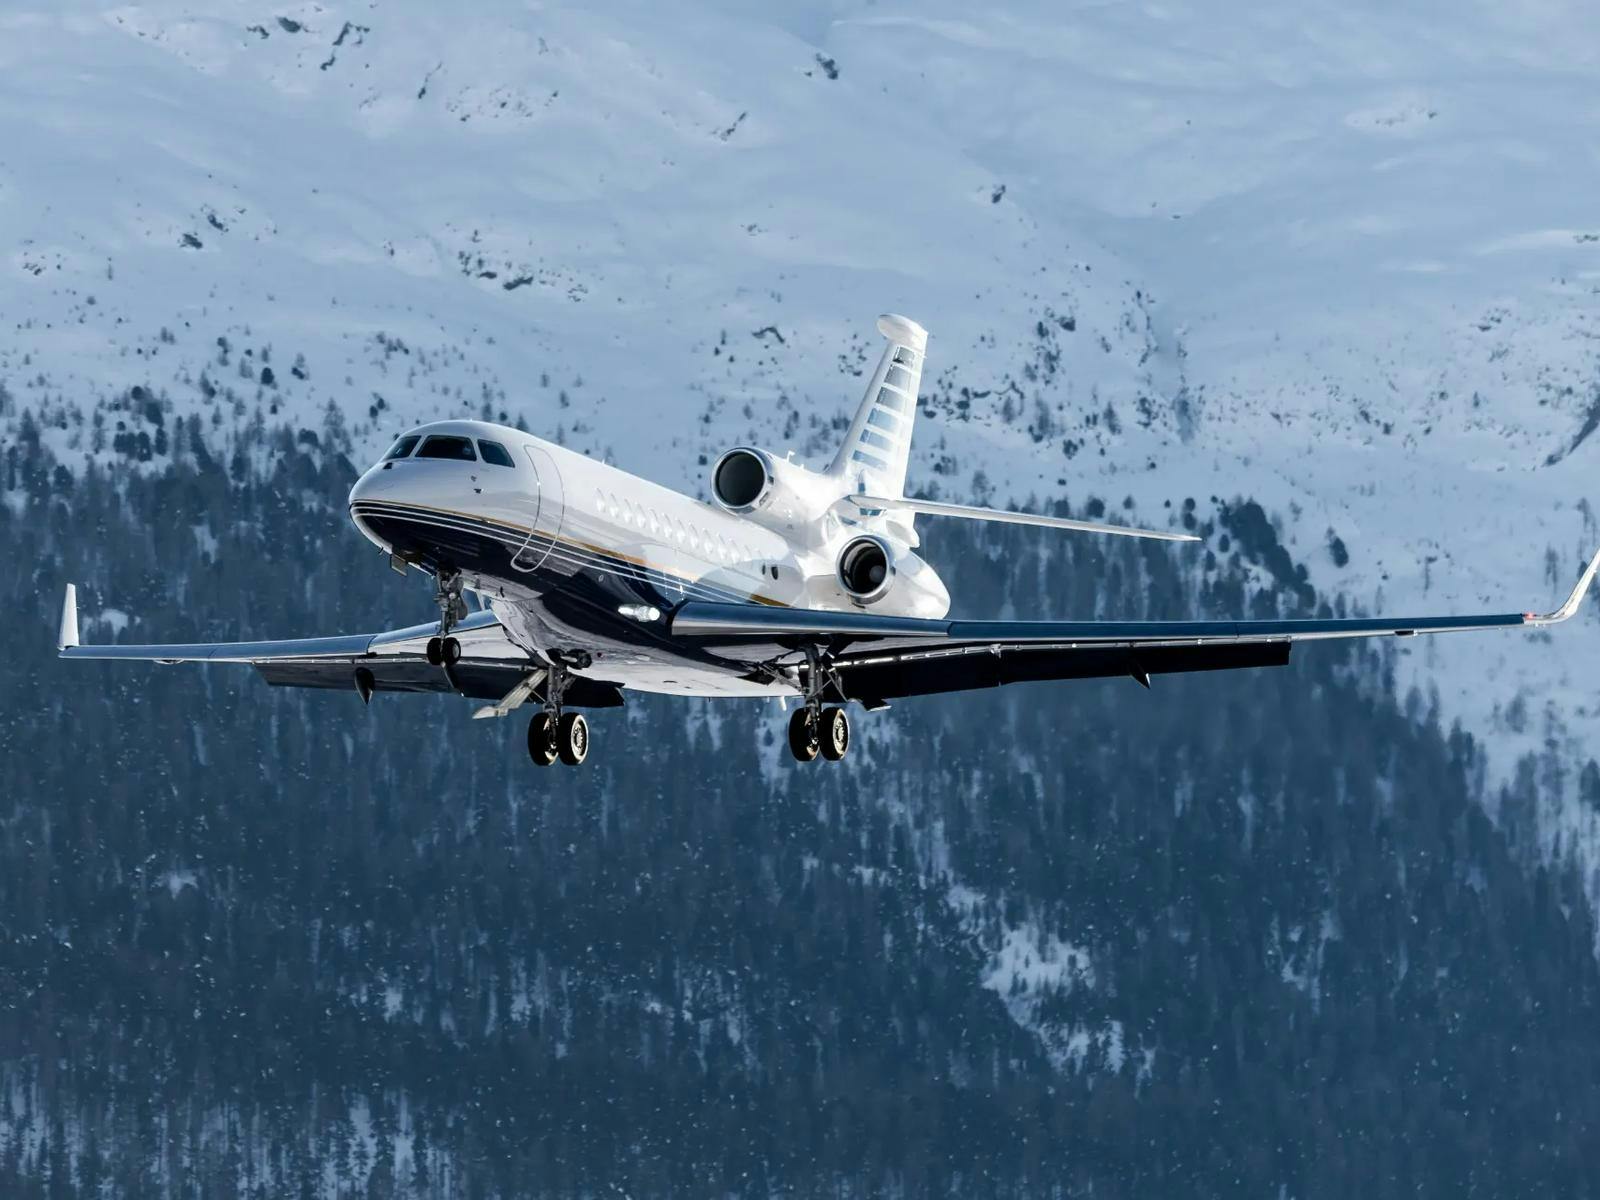 Plane flying against a snowy background.